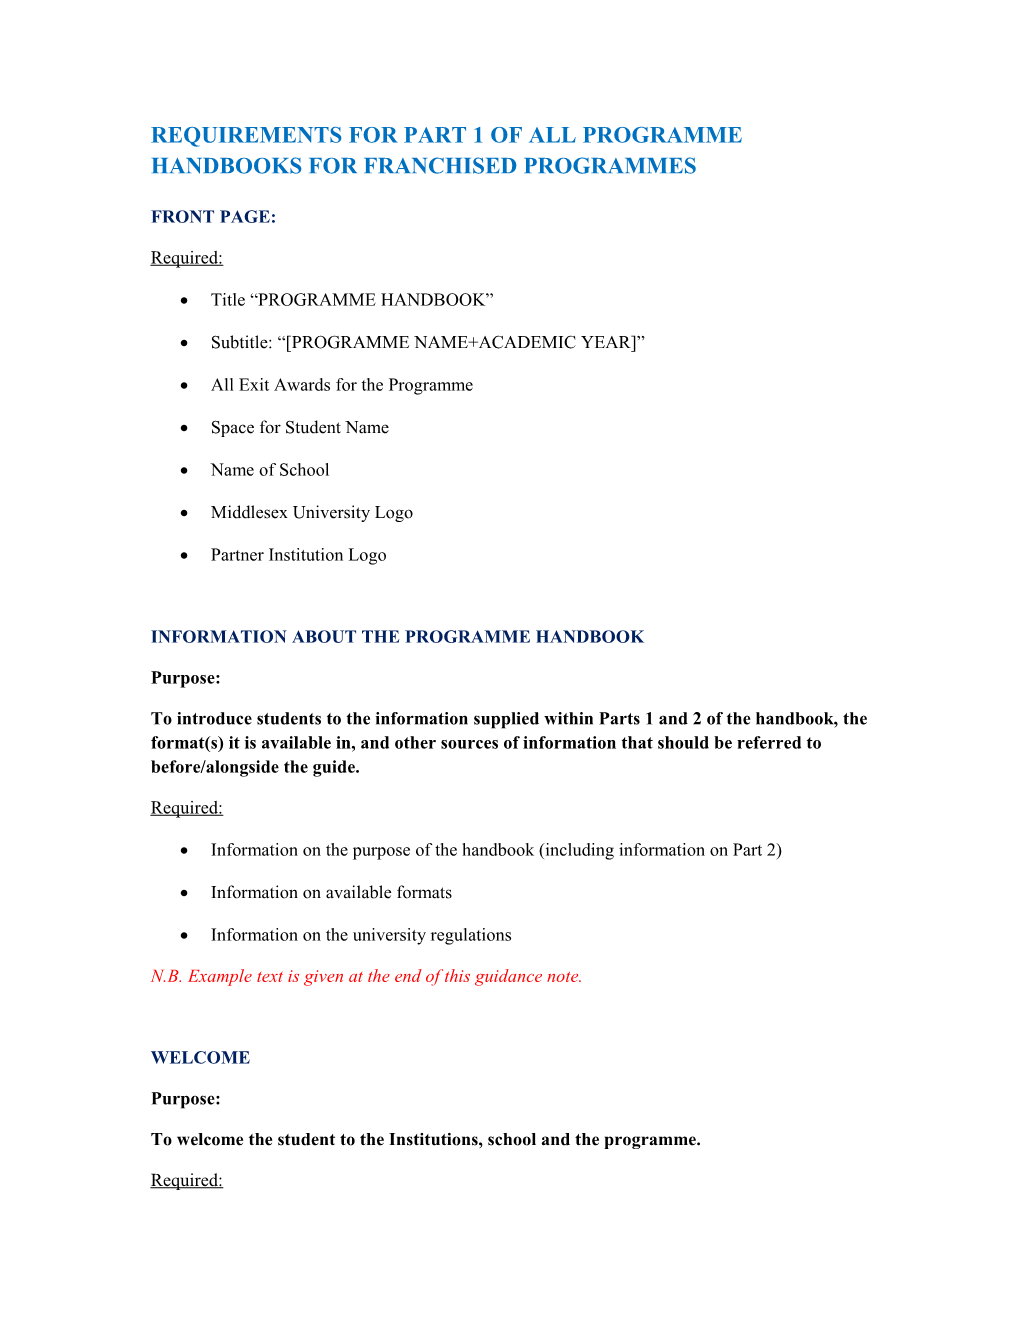 Requirements for Part 1 of All Programme Handbooks for Franchised Programmes Front Page